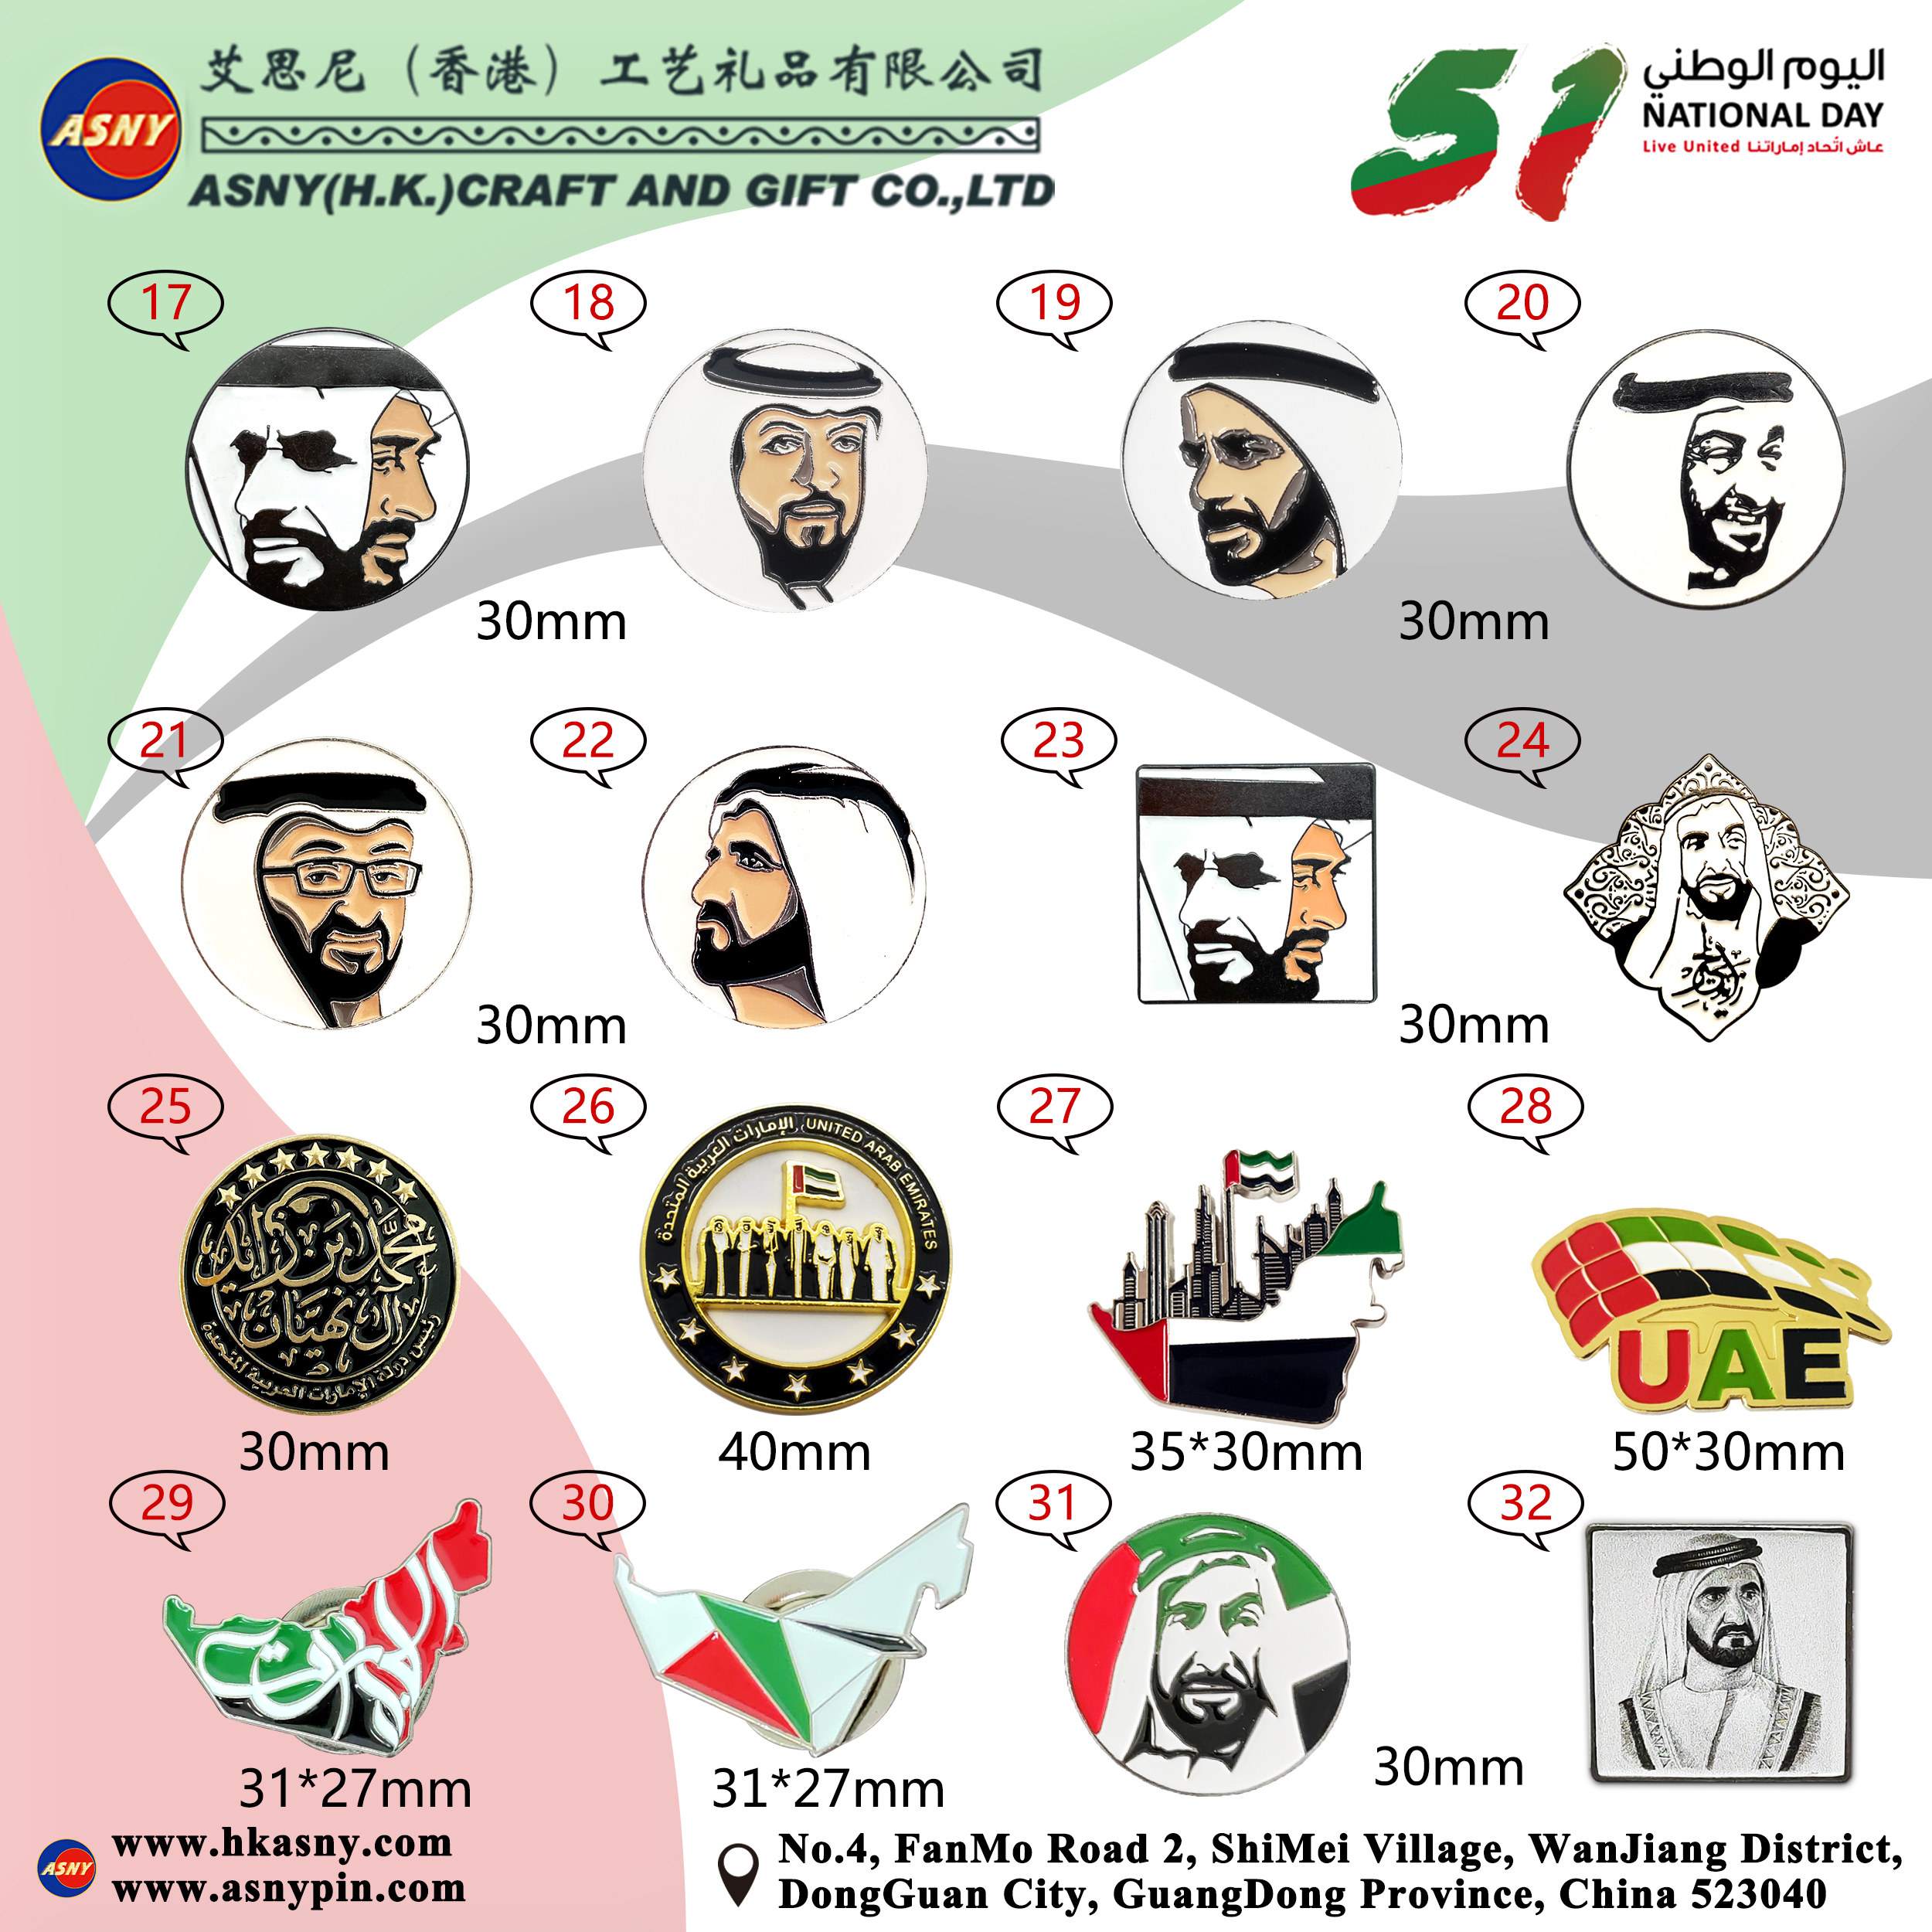 Product Catalog - UAE 51st National Day Collection (2)